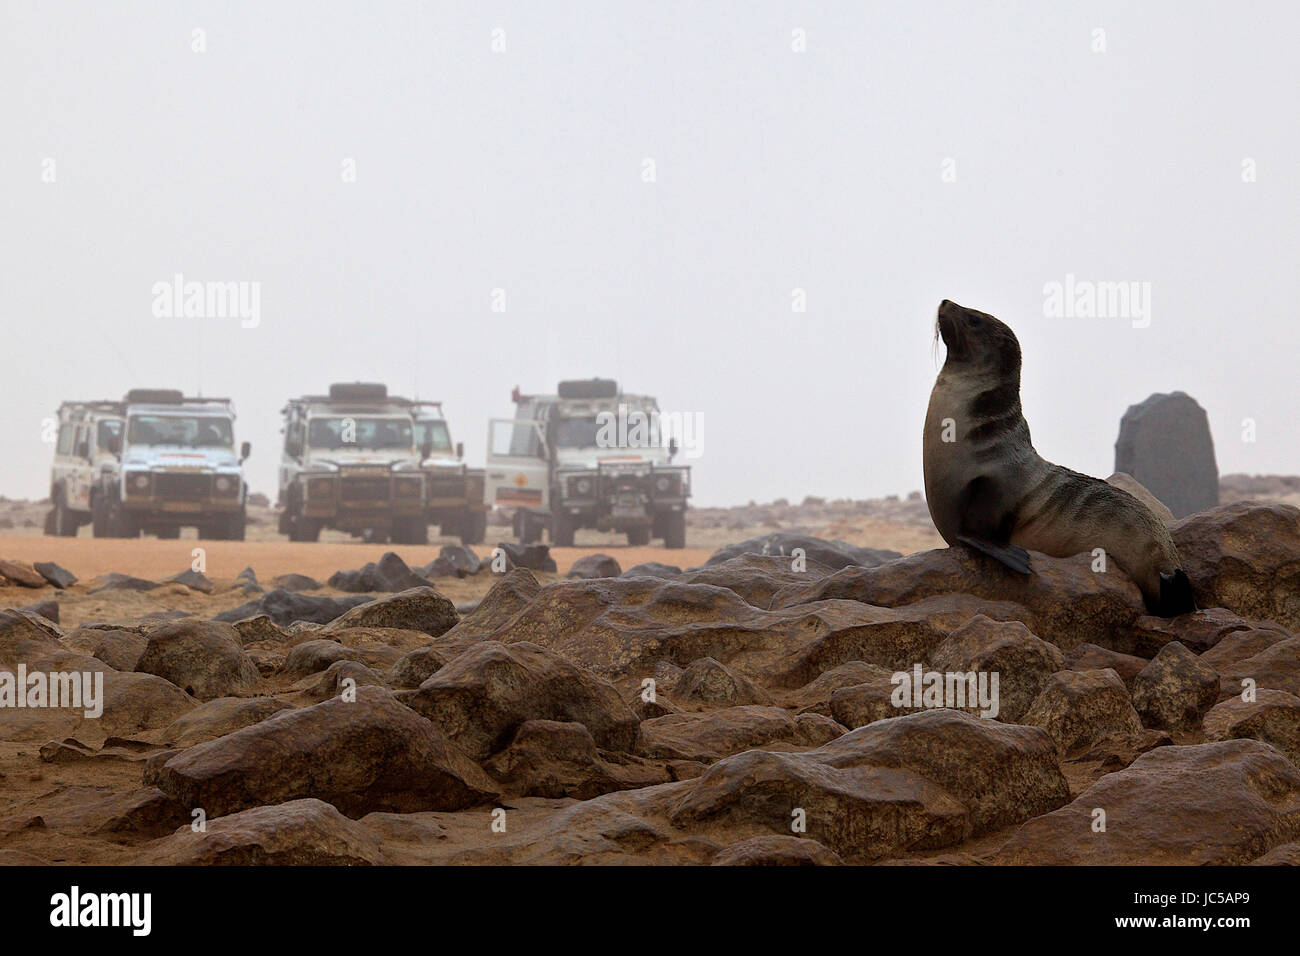 Sea lions in Africa with cars in background Stock Photo